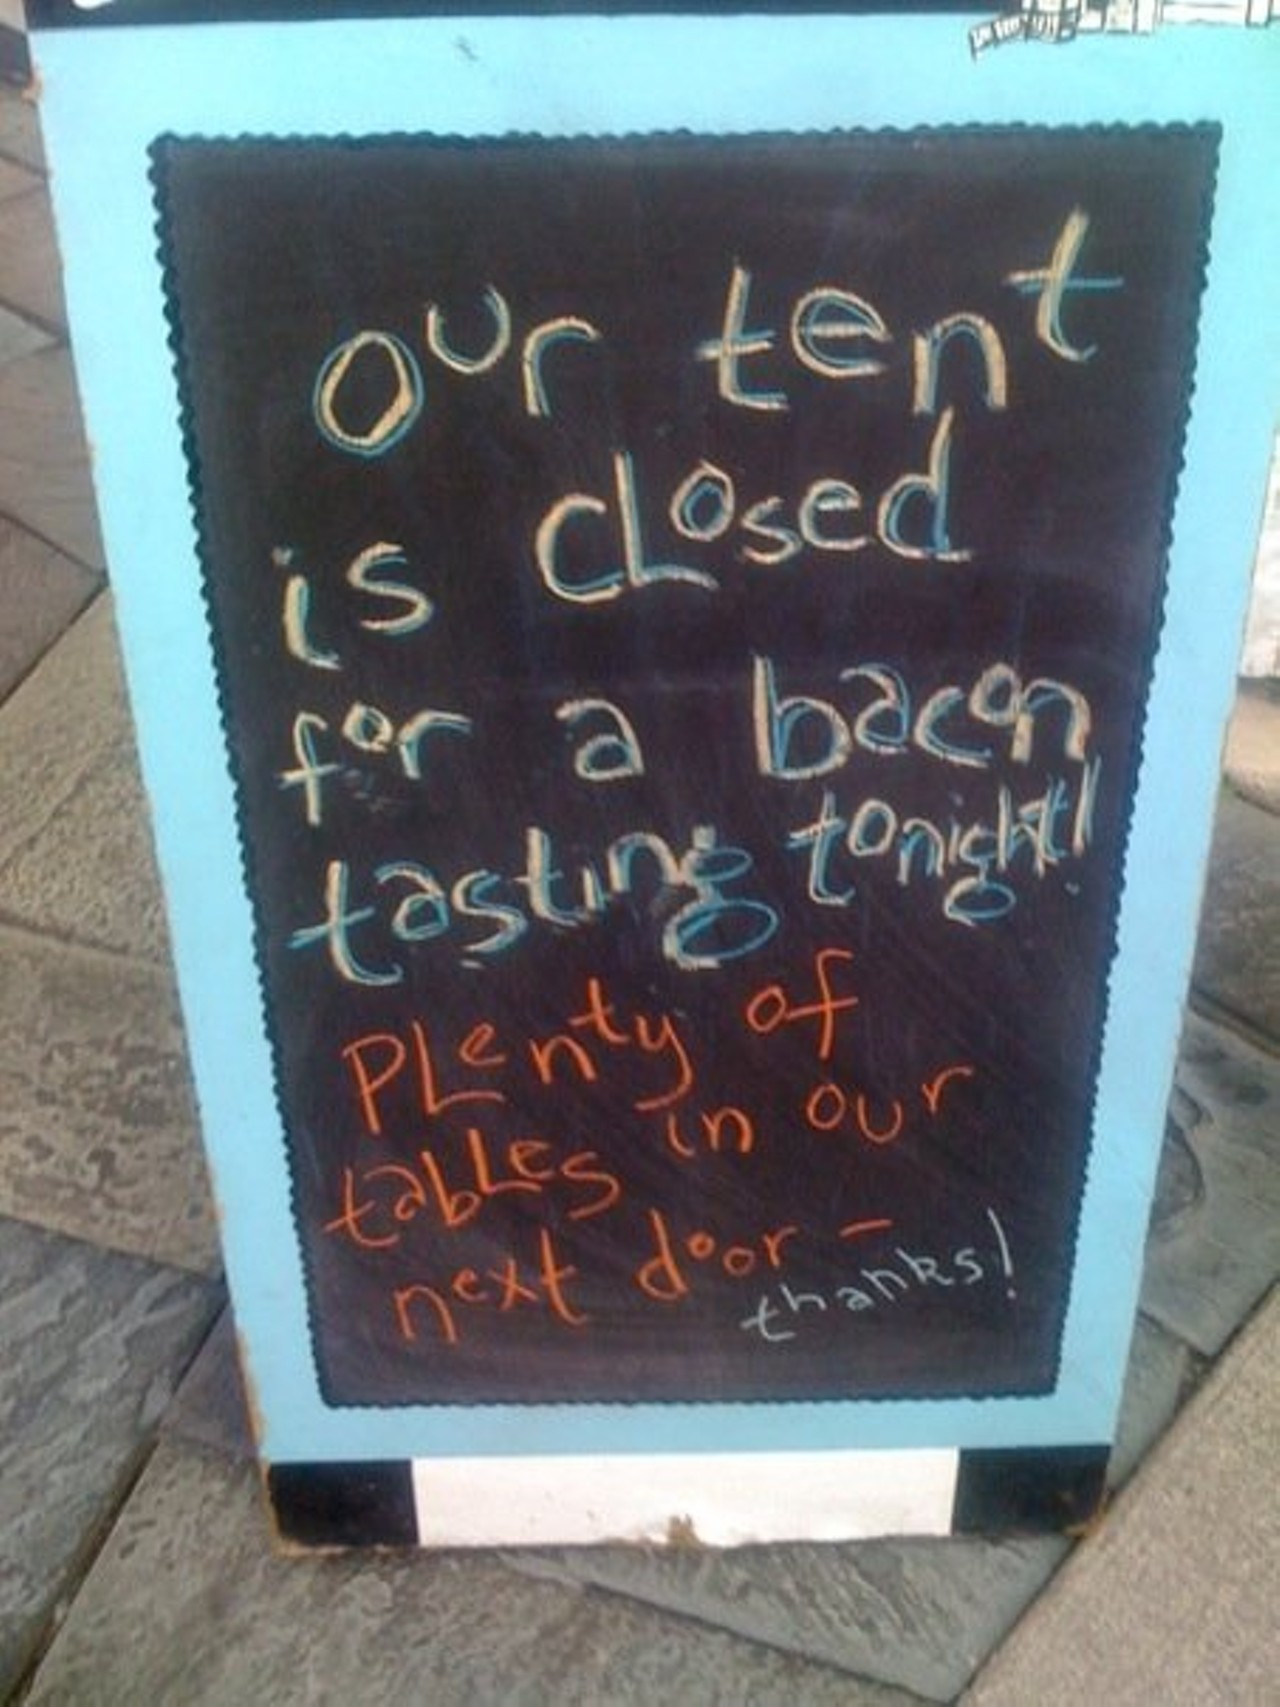 Spotted by our friends at Daily Fork, closing for bacon is a pretty good excuse.